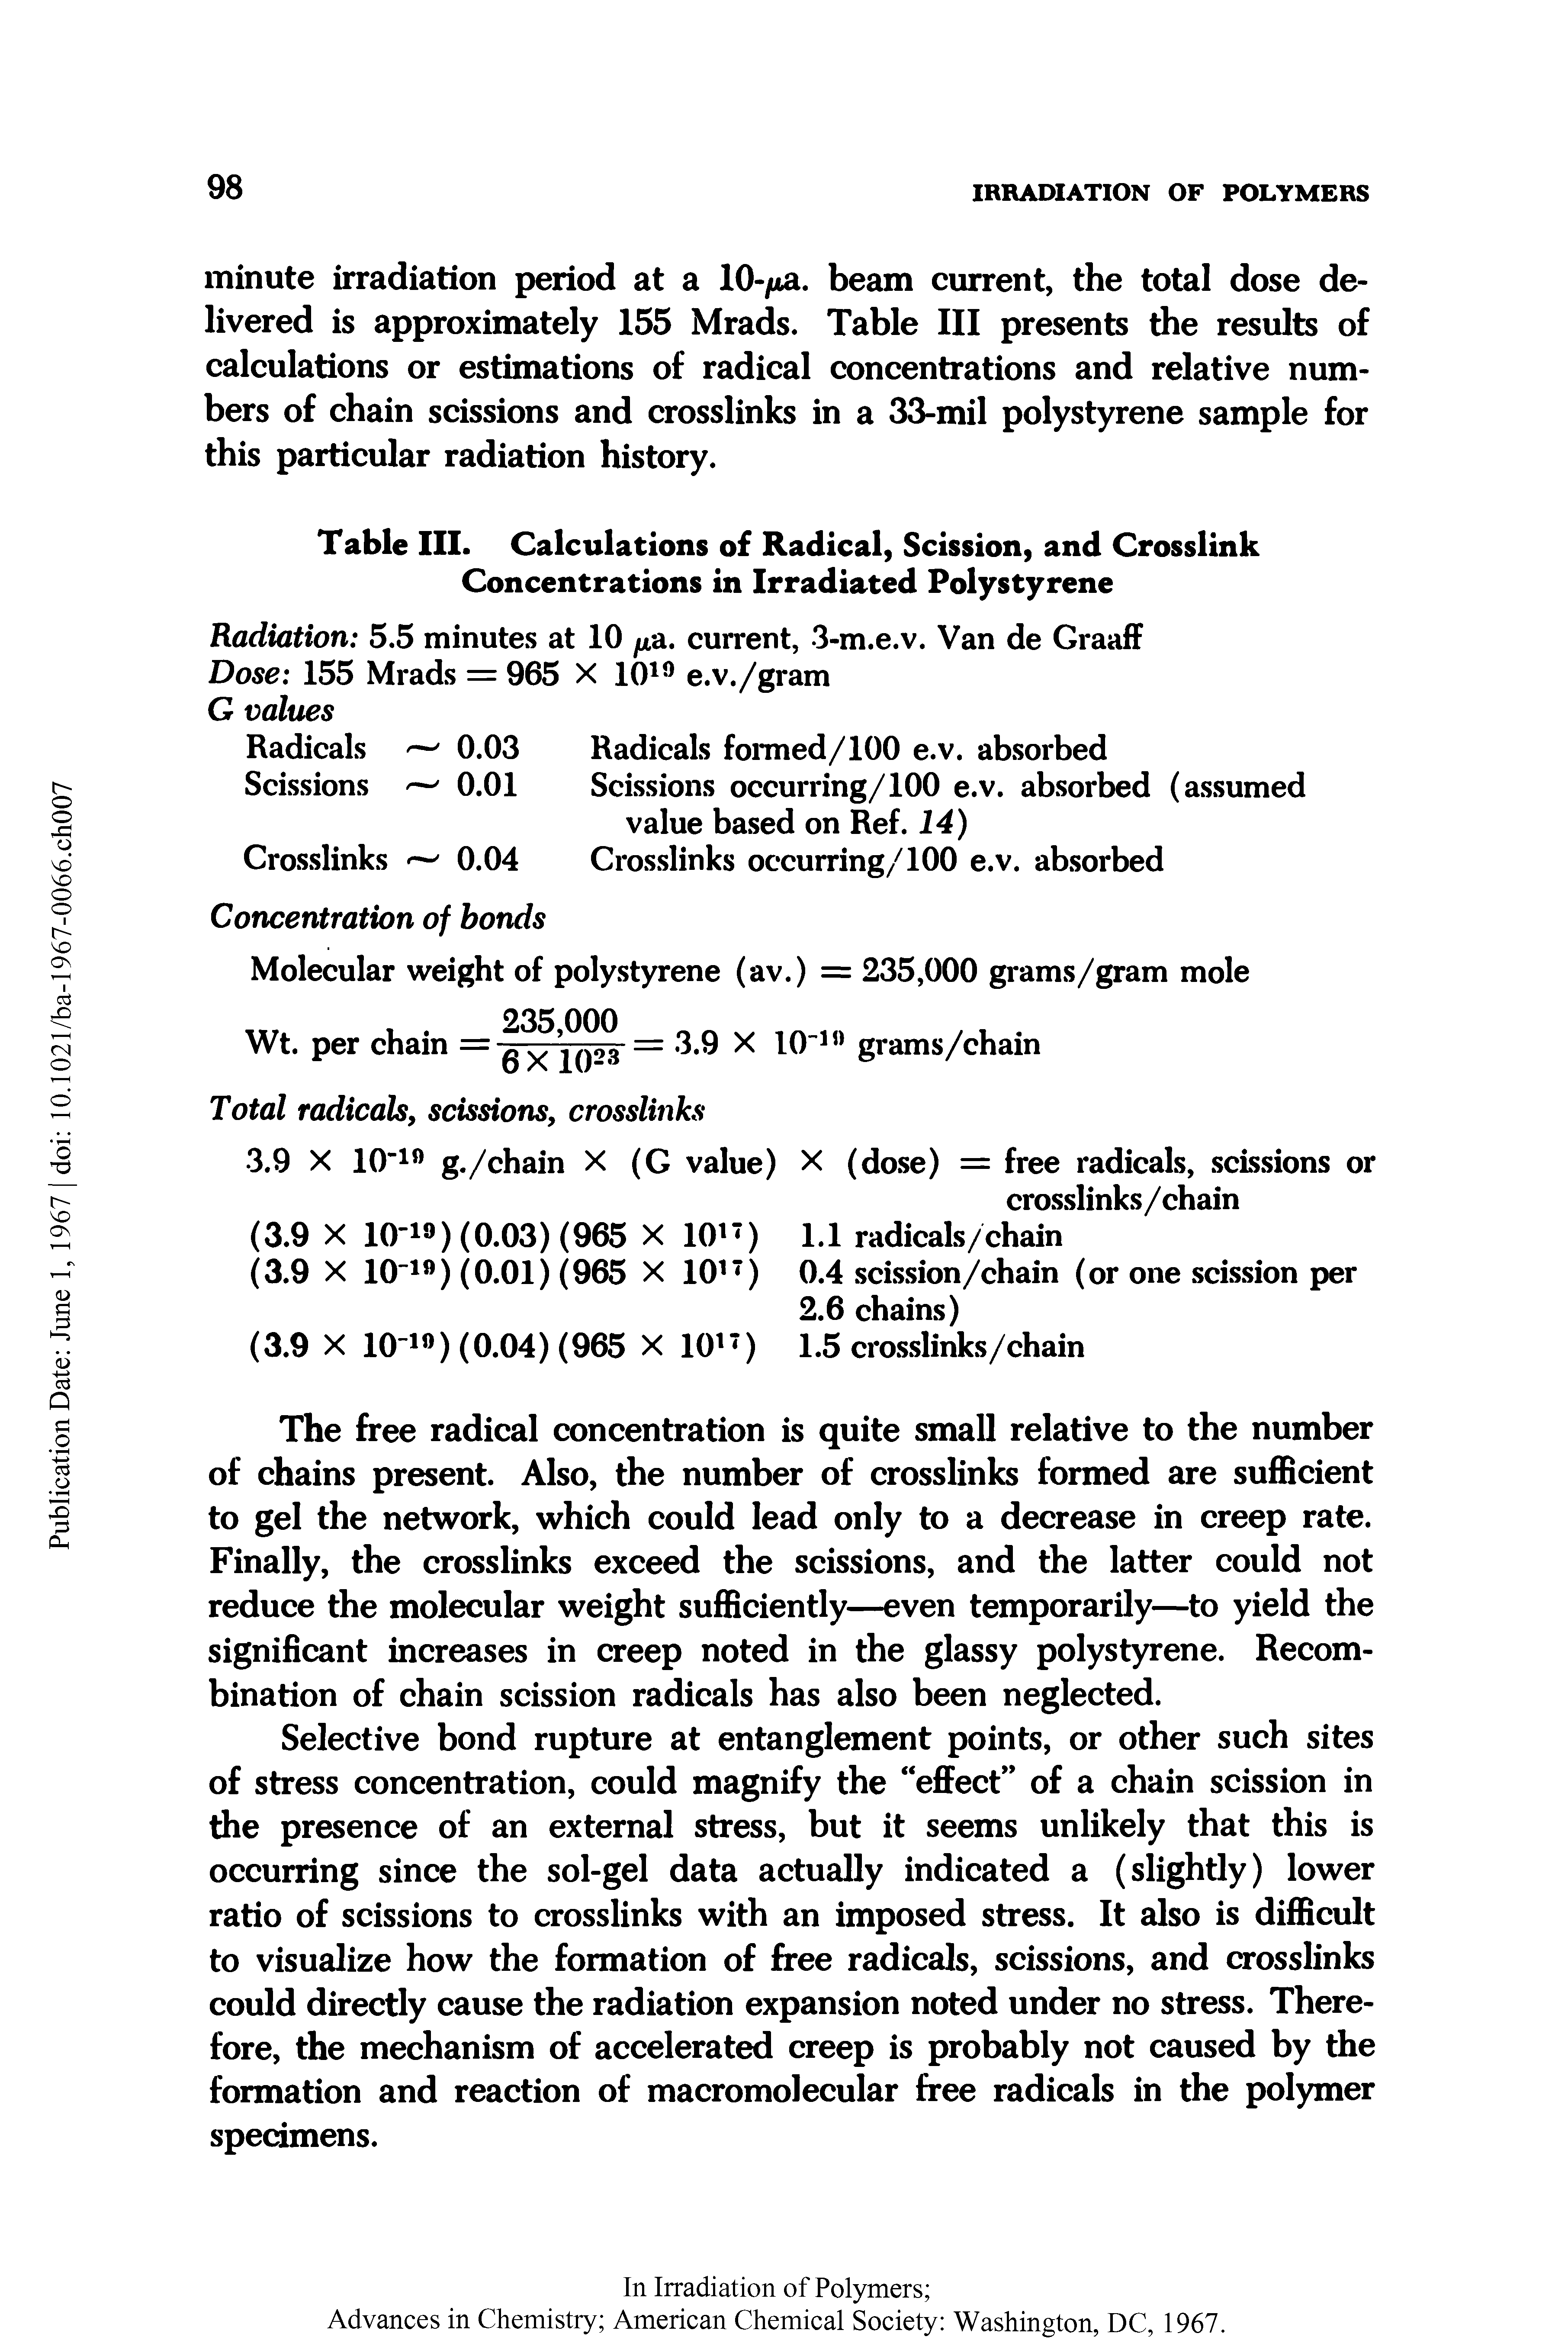 Table III. Calculations of Radical, Scission, and Crosslink Concentrations in Irradiated Polystyrene...